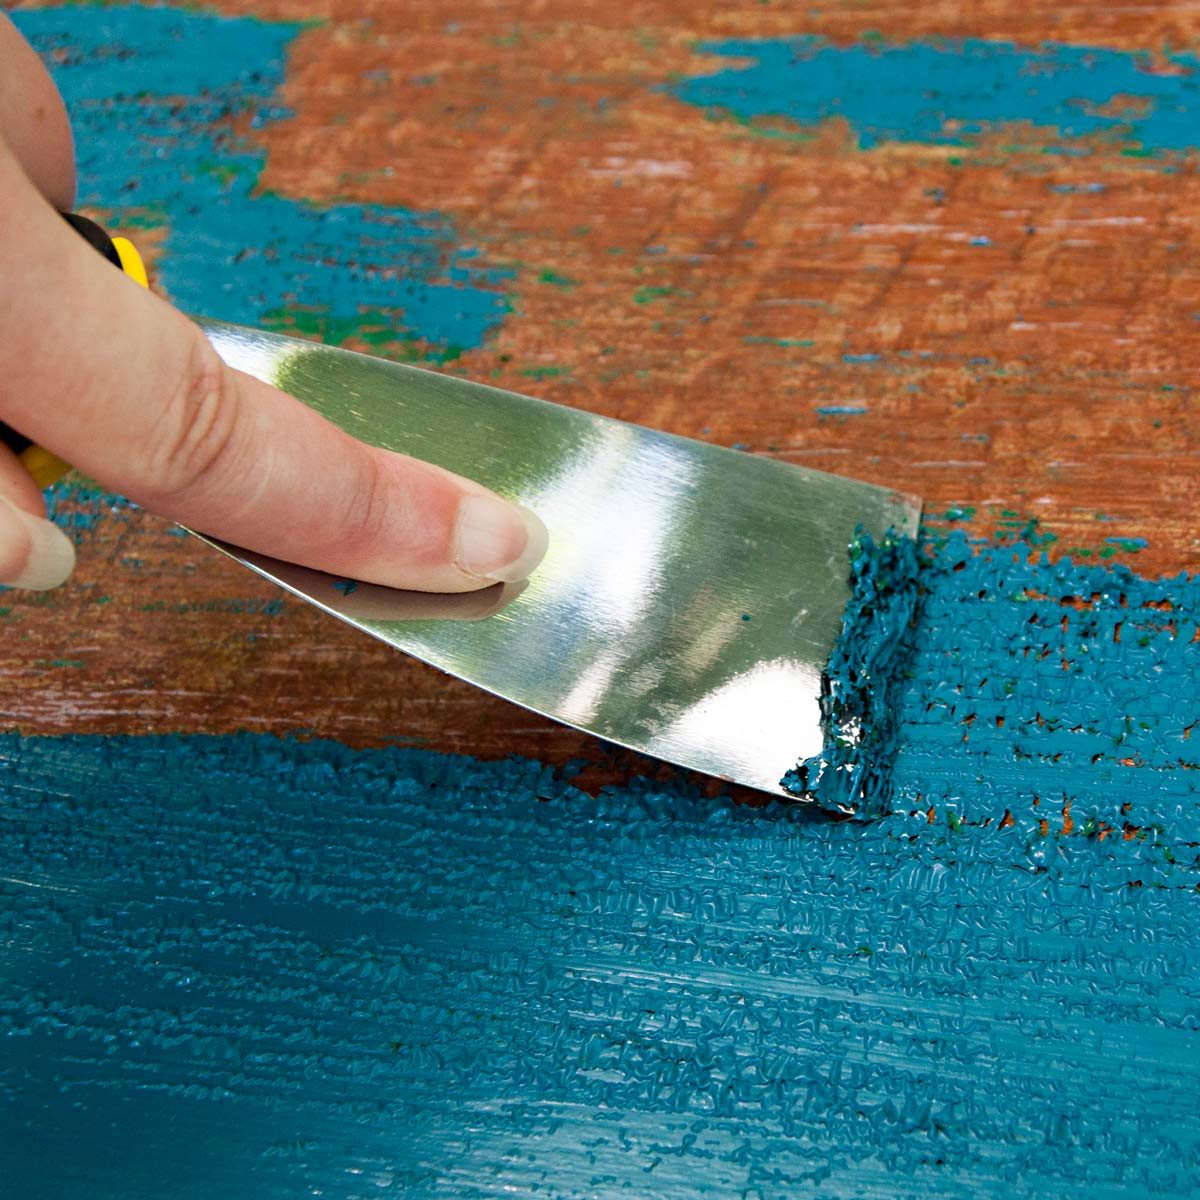 how do you remove paint from wood without sanding or chemicals